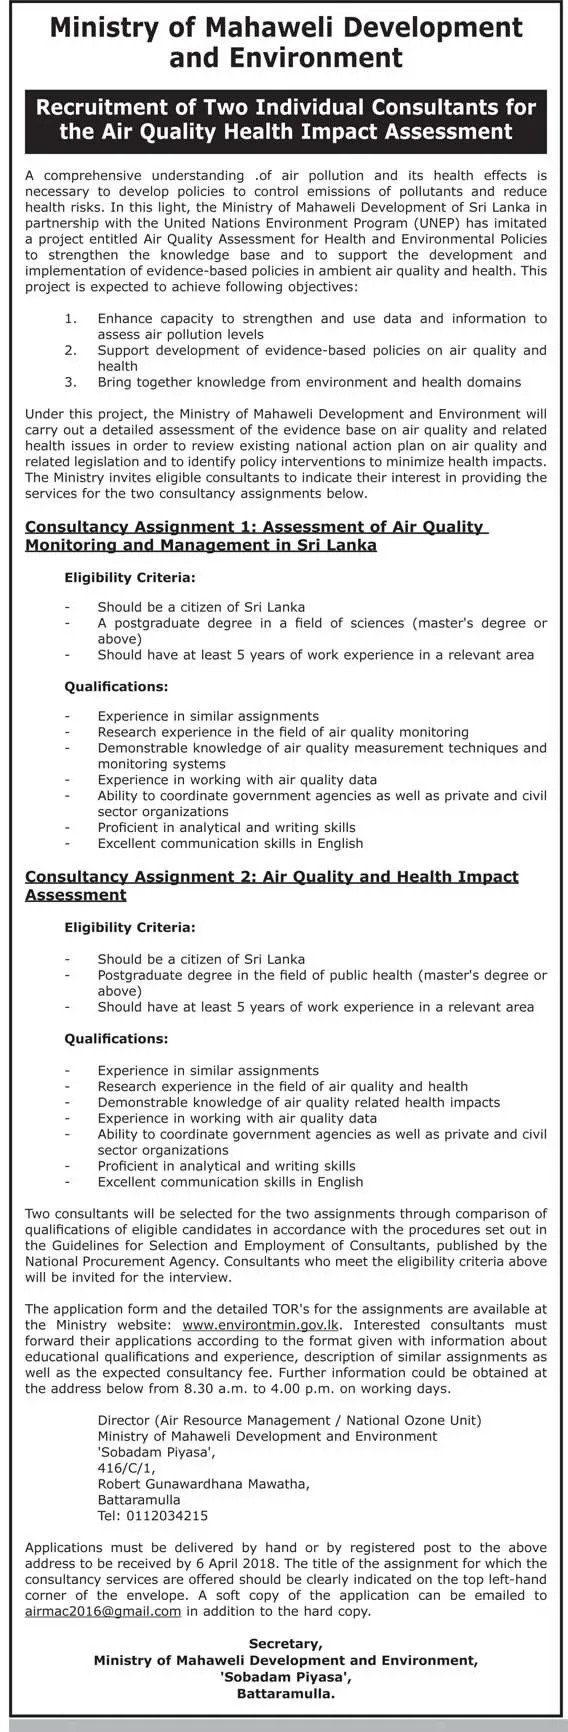 Consultants for the Air Quality Health Assessment - Ministry of Mahaweli Development & Environment